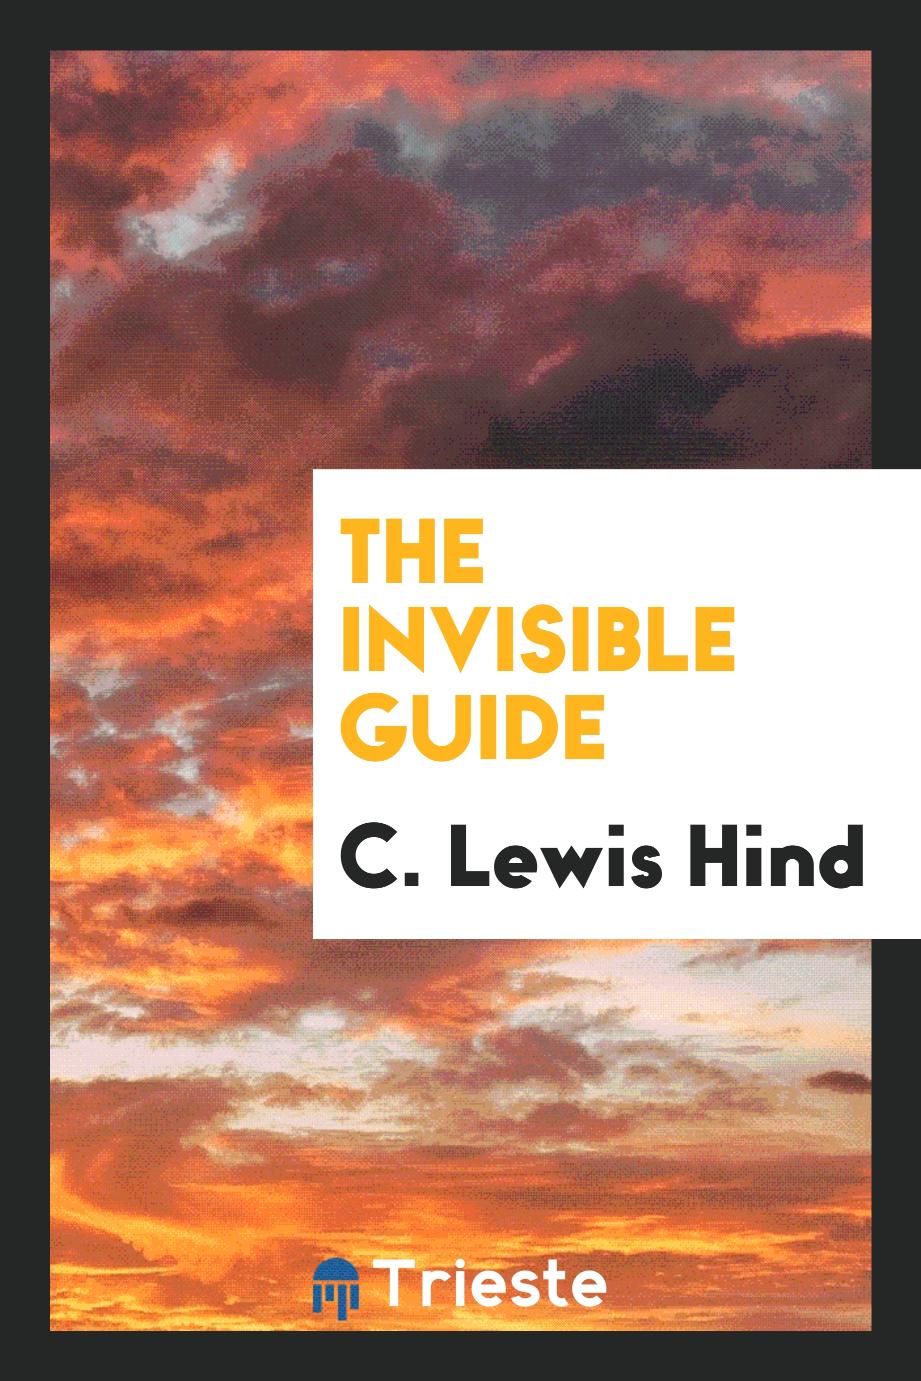 The invisible guide